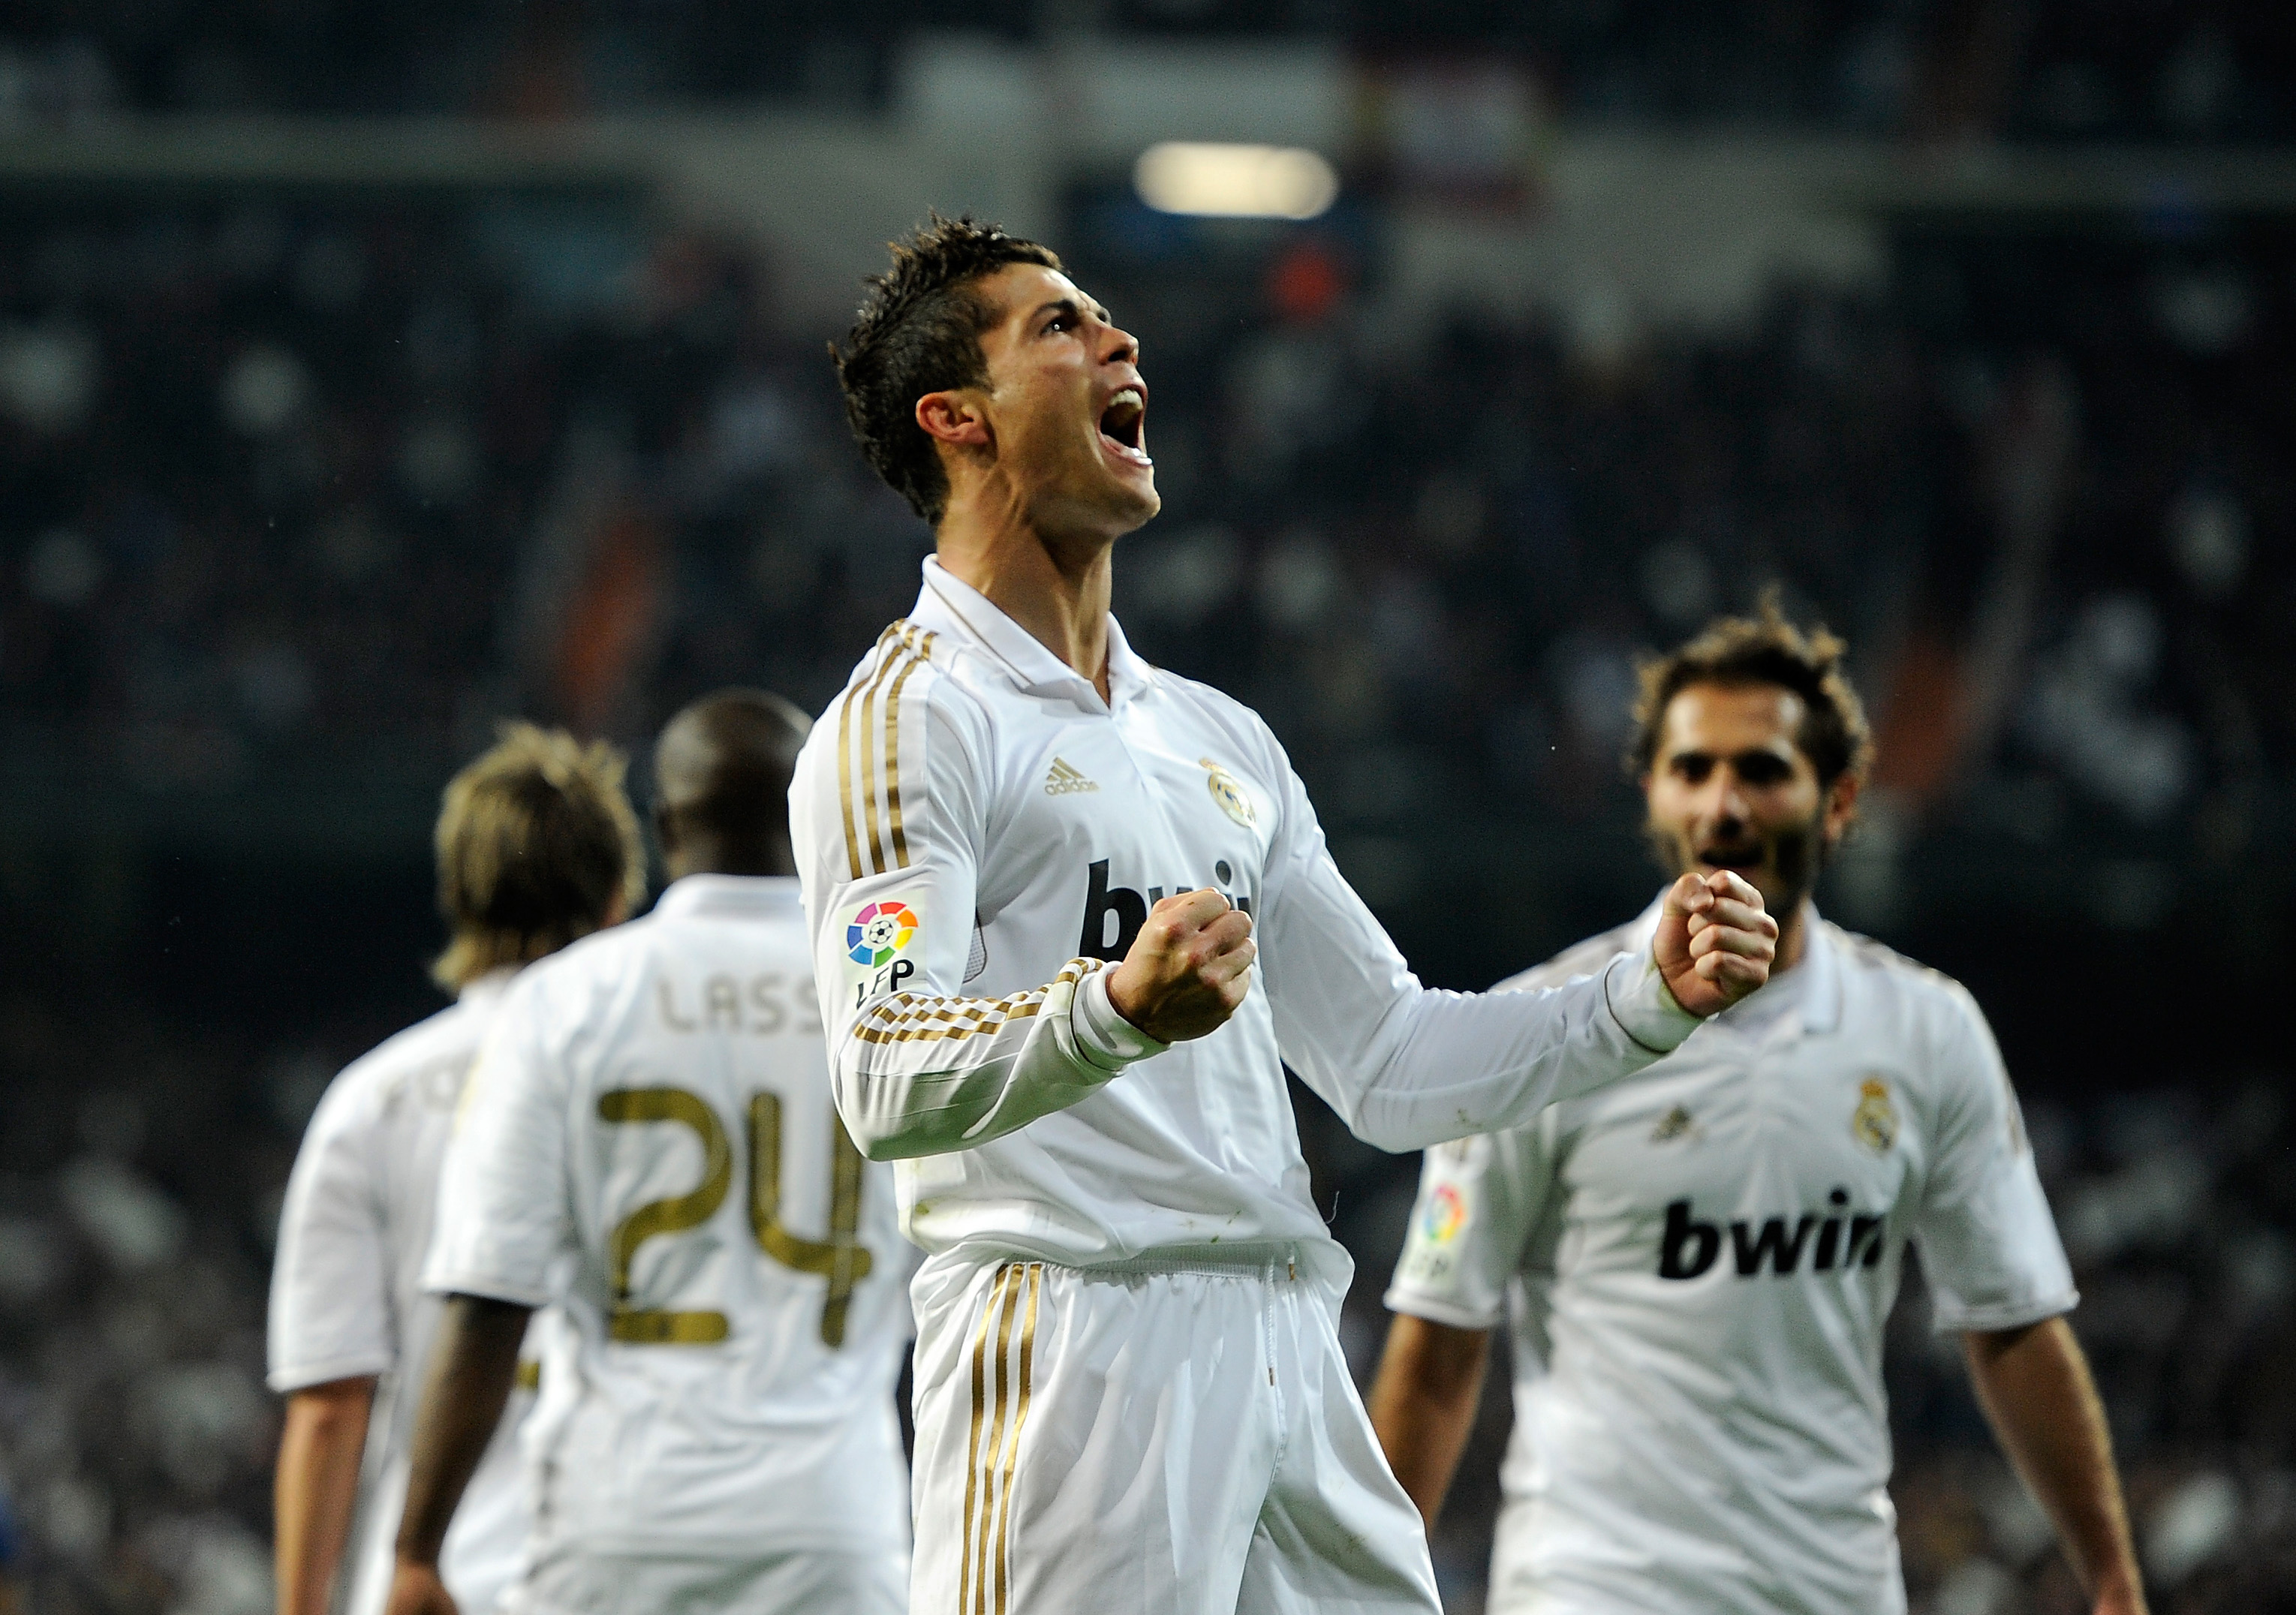 Cristiano Ronaldo celebrates after scoring for Real Madrid against Barcelona in January 2012.